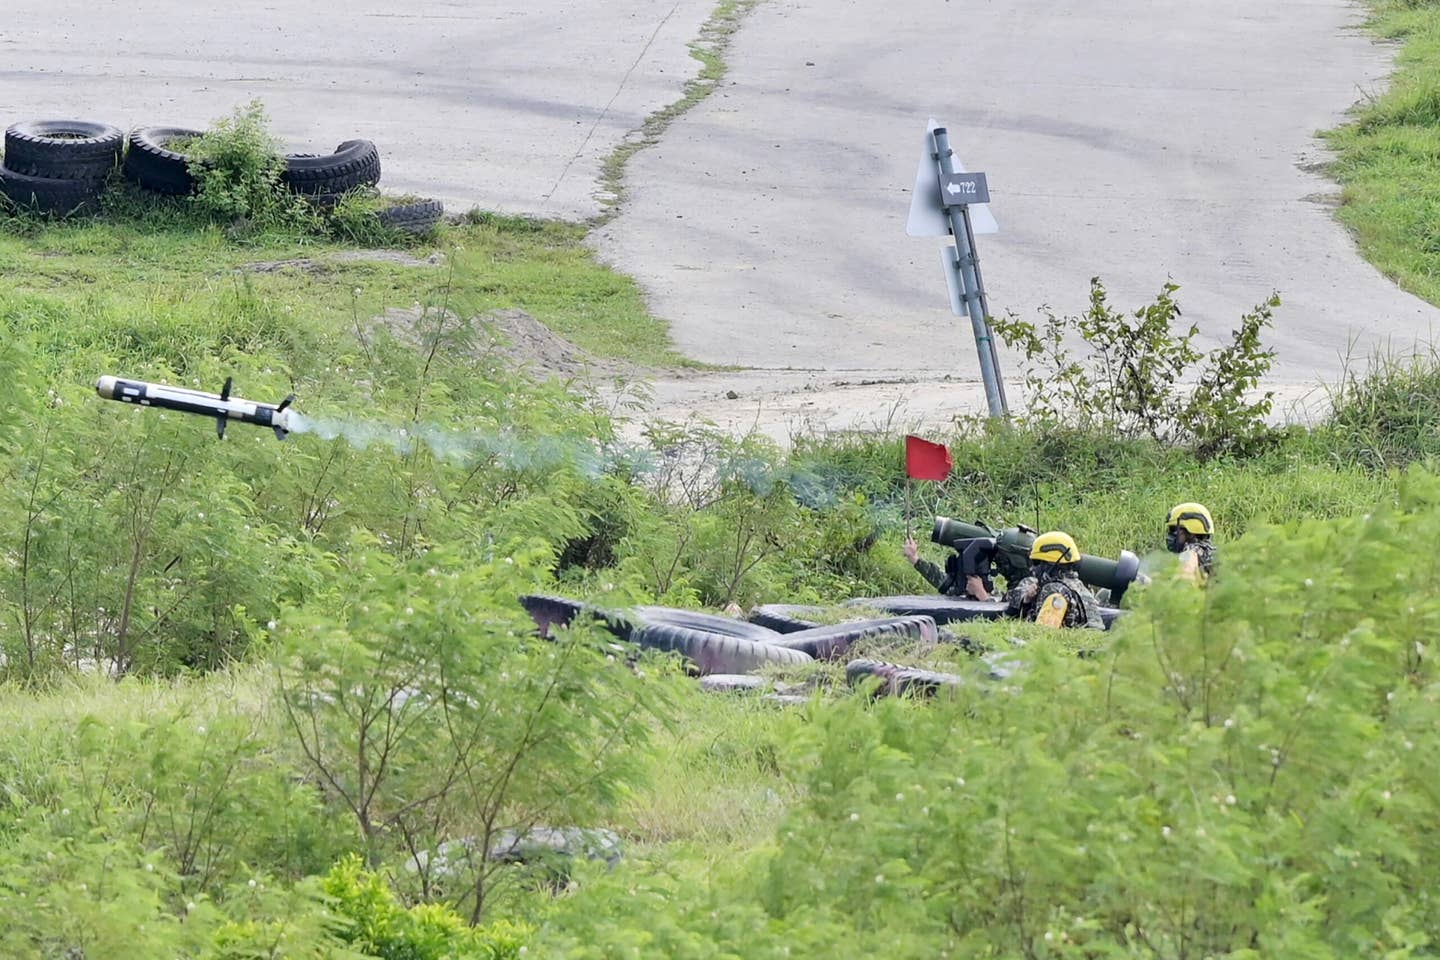 Taiwanese soldiers launch a Javelin anti-tank missile during a live-fire military exercise in Pingtung county, southern Taiwan, on September 7, 2022. <em>Photo by SAM YEH/AFP via Getty Images</em>